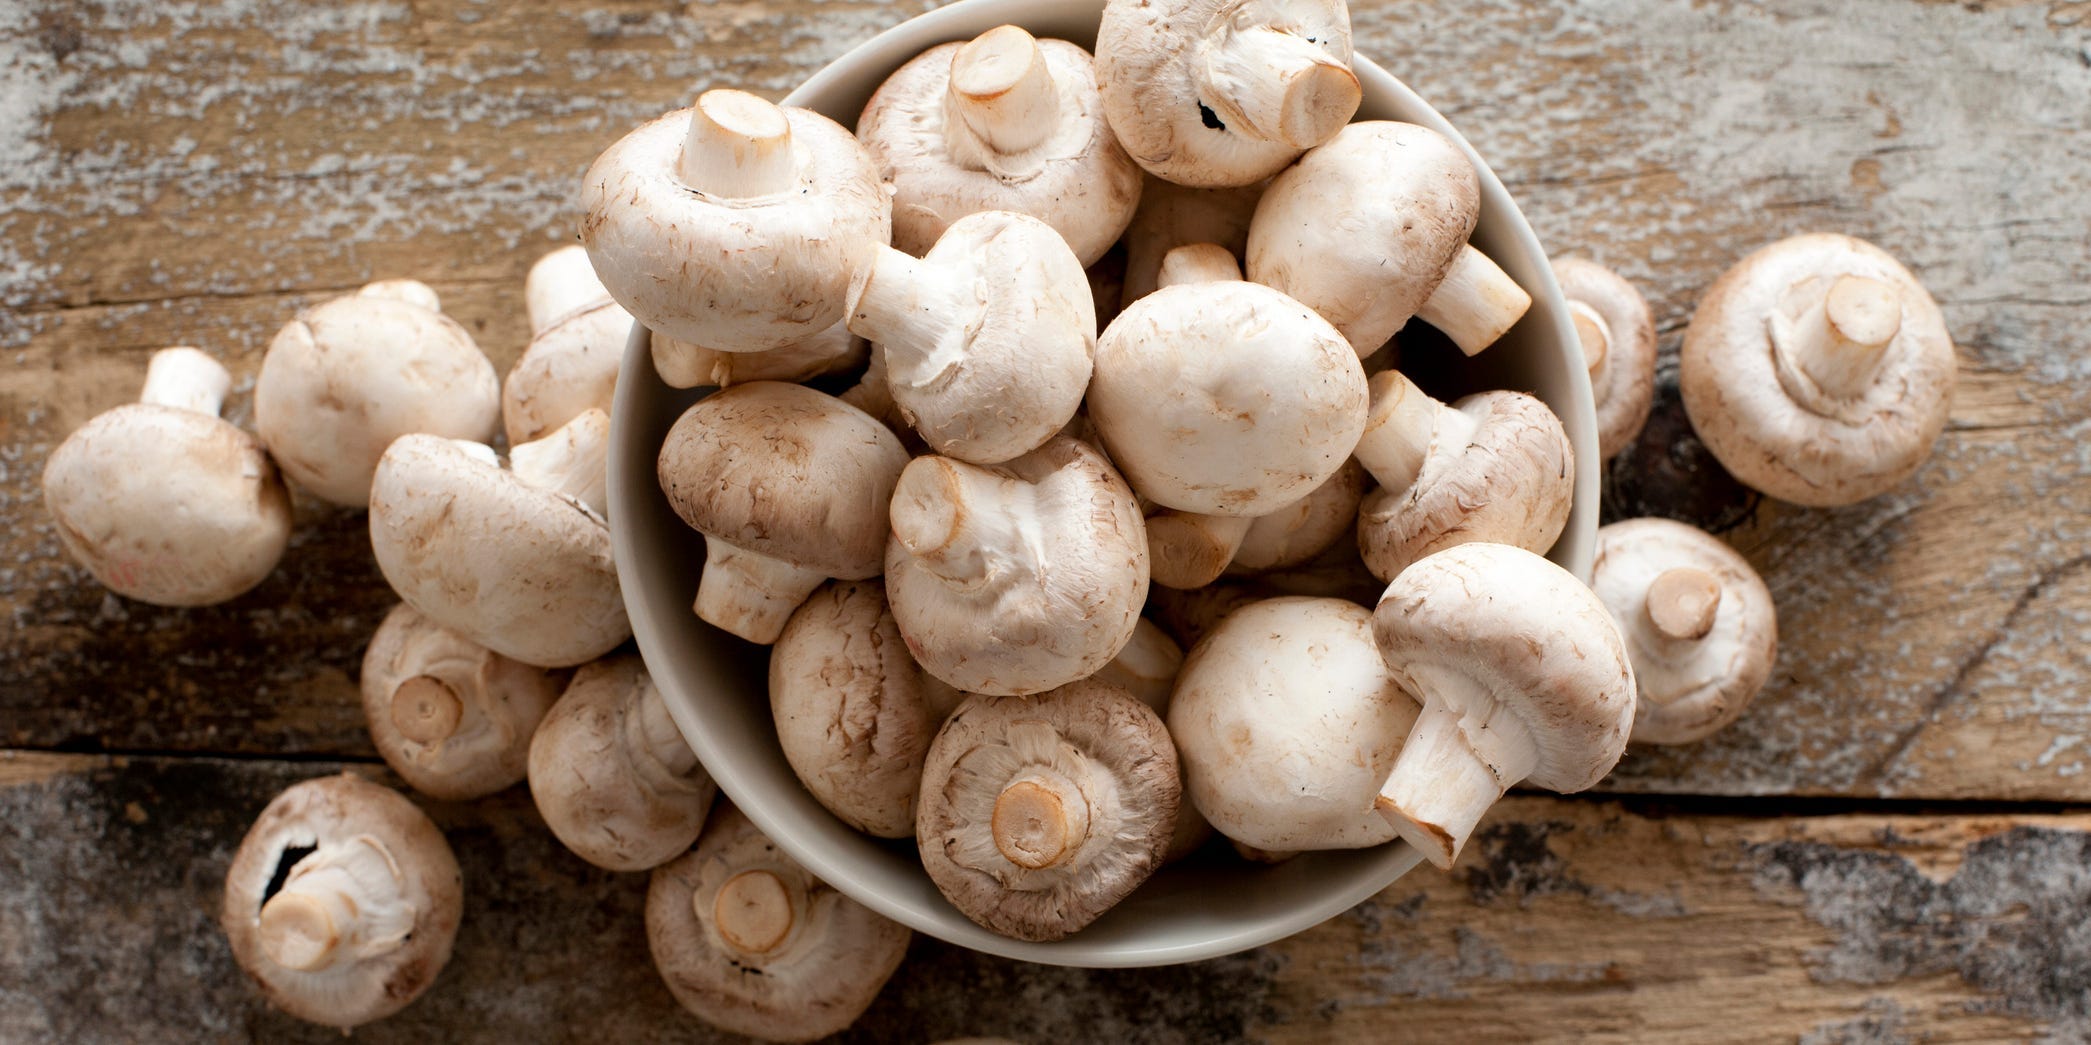 An overflowing bowl of white button mushrooms